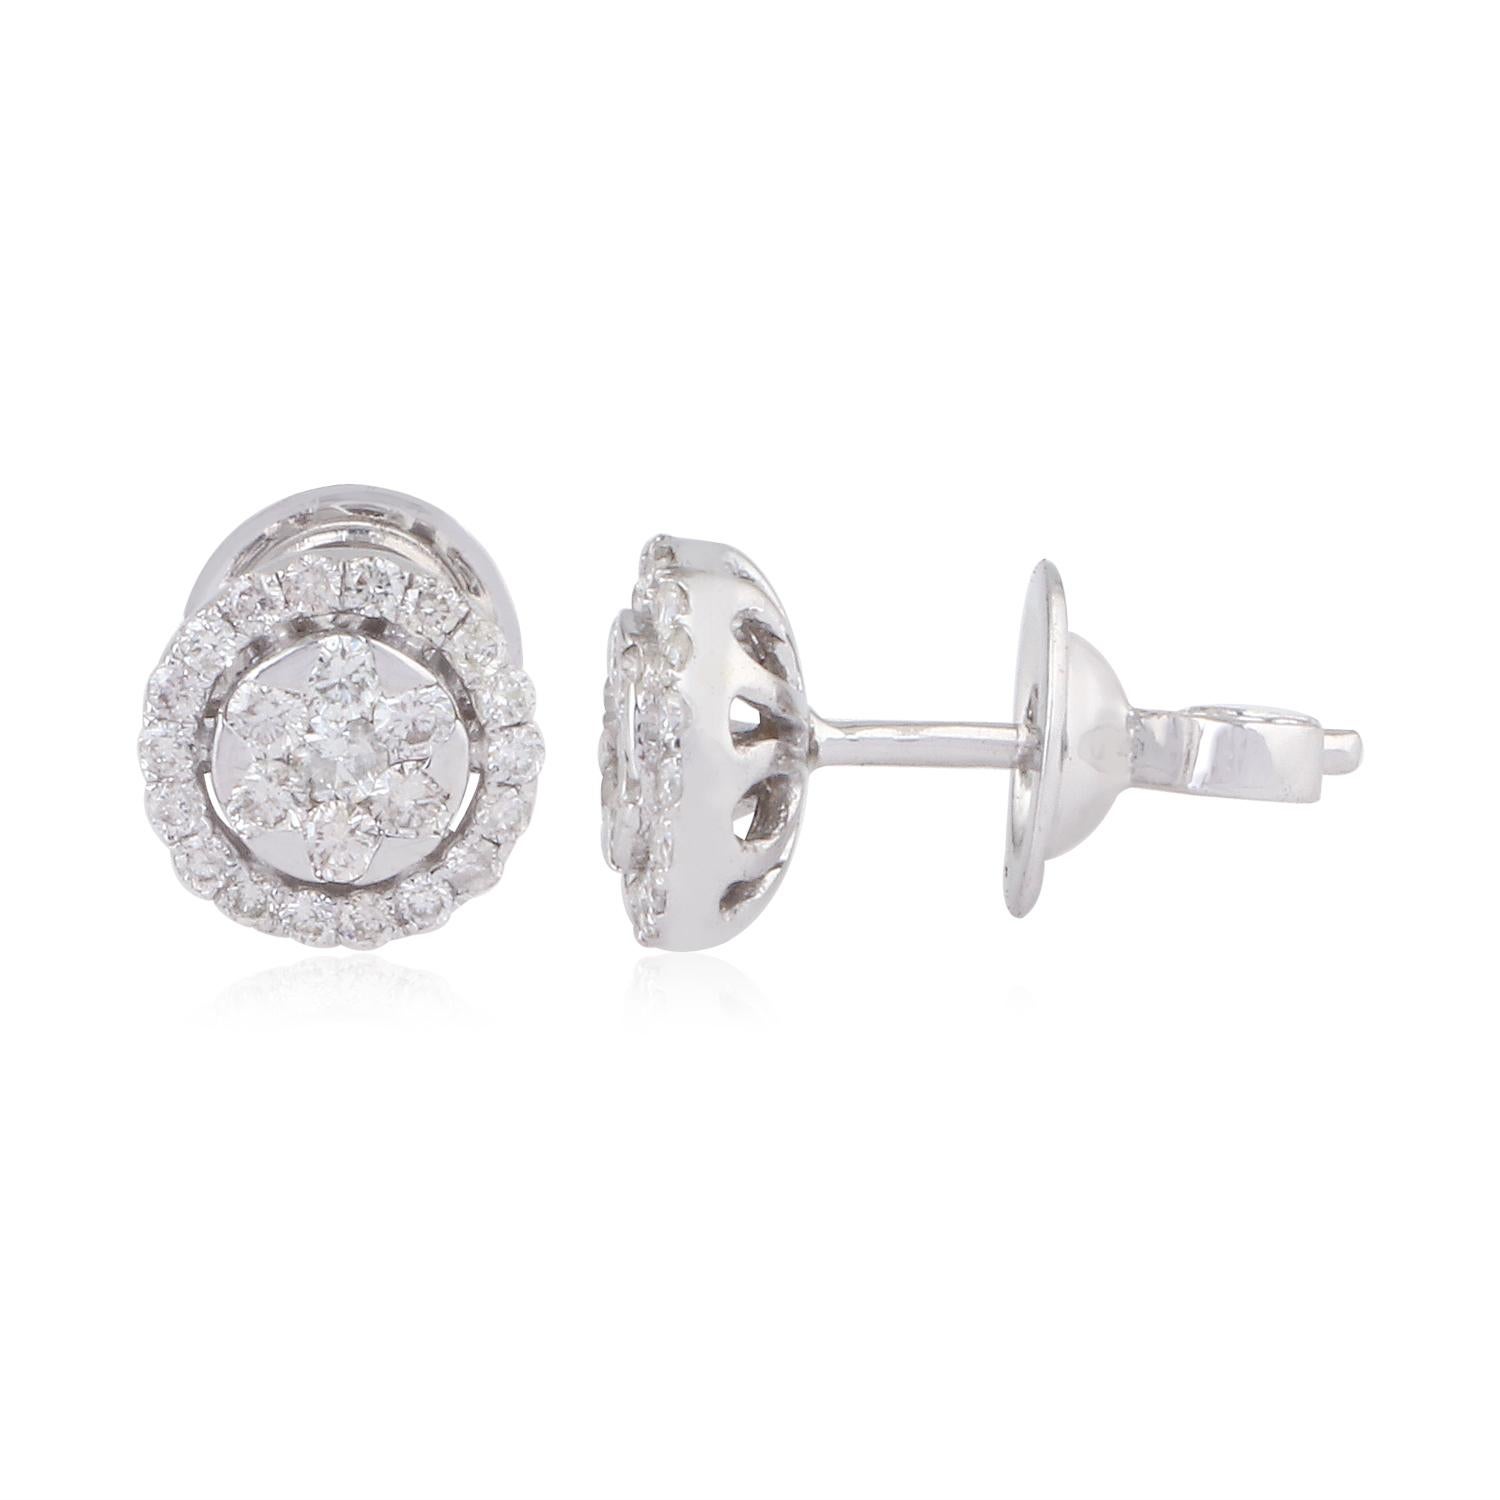 Item Code :- CN-26138
Gross Wet. :- 2.73 gm
18k White Gold Wet. :- 2.61 gm
Diamond Wet. :- 0.60 Carat ( AVERAGE DIAMOND CLARITY SI1-SI2 & COLOR H-I )
Earrings Size :- 8 mm approx.

✦ Sizing
.....................
We can adjust most items to fit your